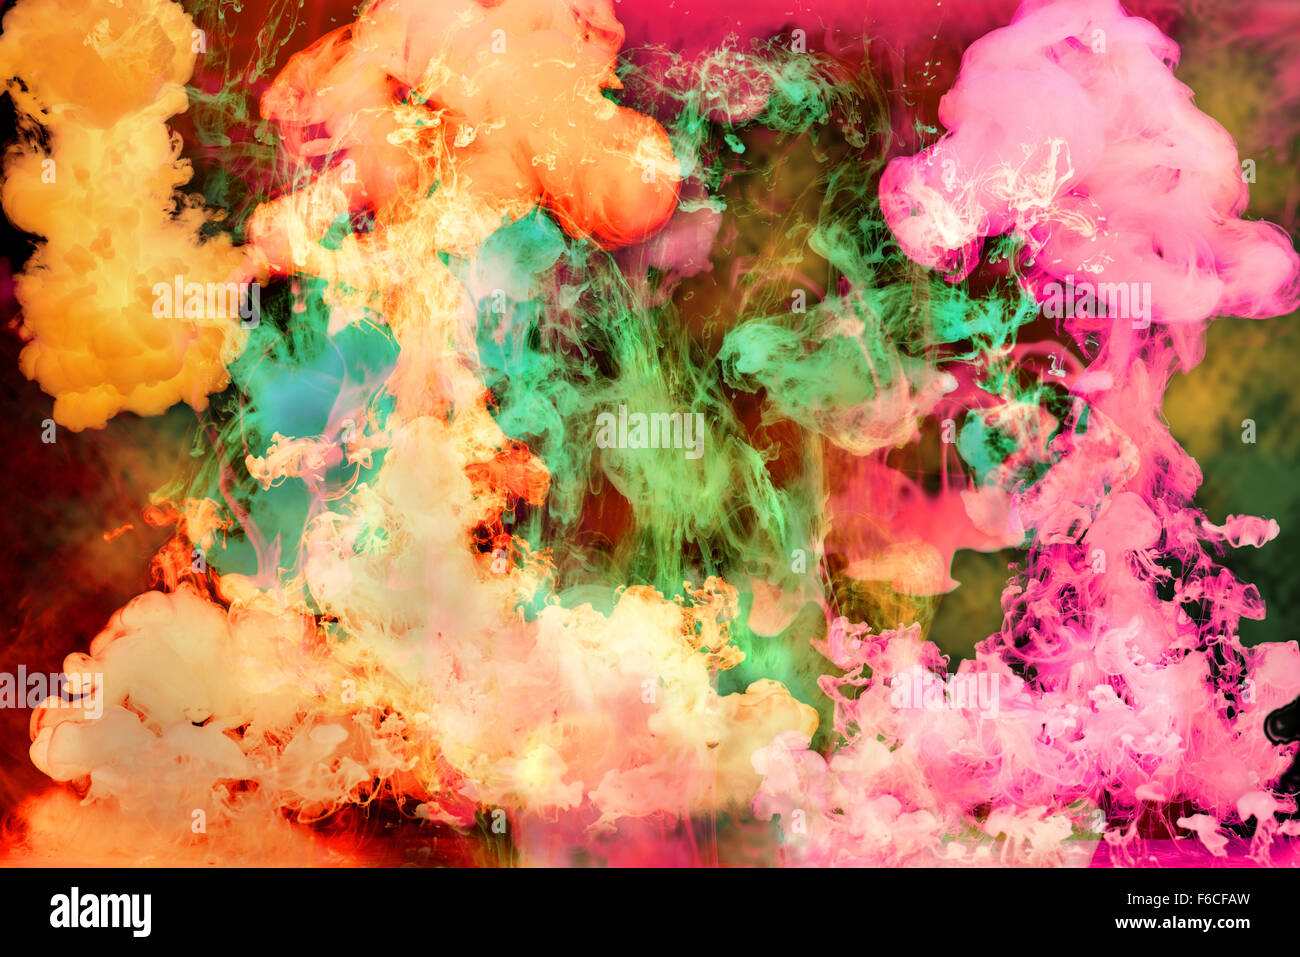 Colorful bright inks dissolving in water over a dark background Stock Photo